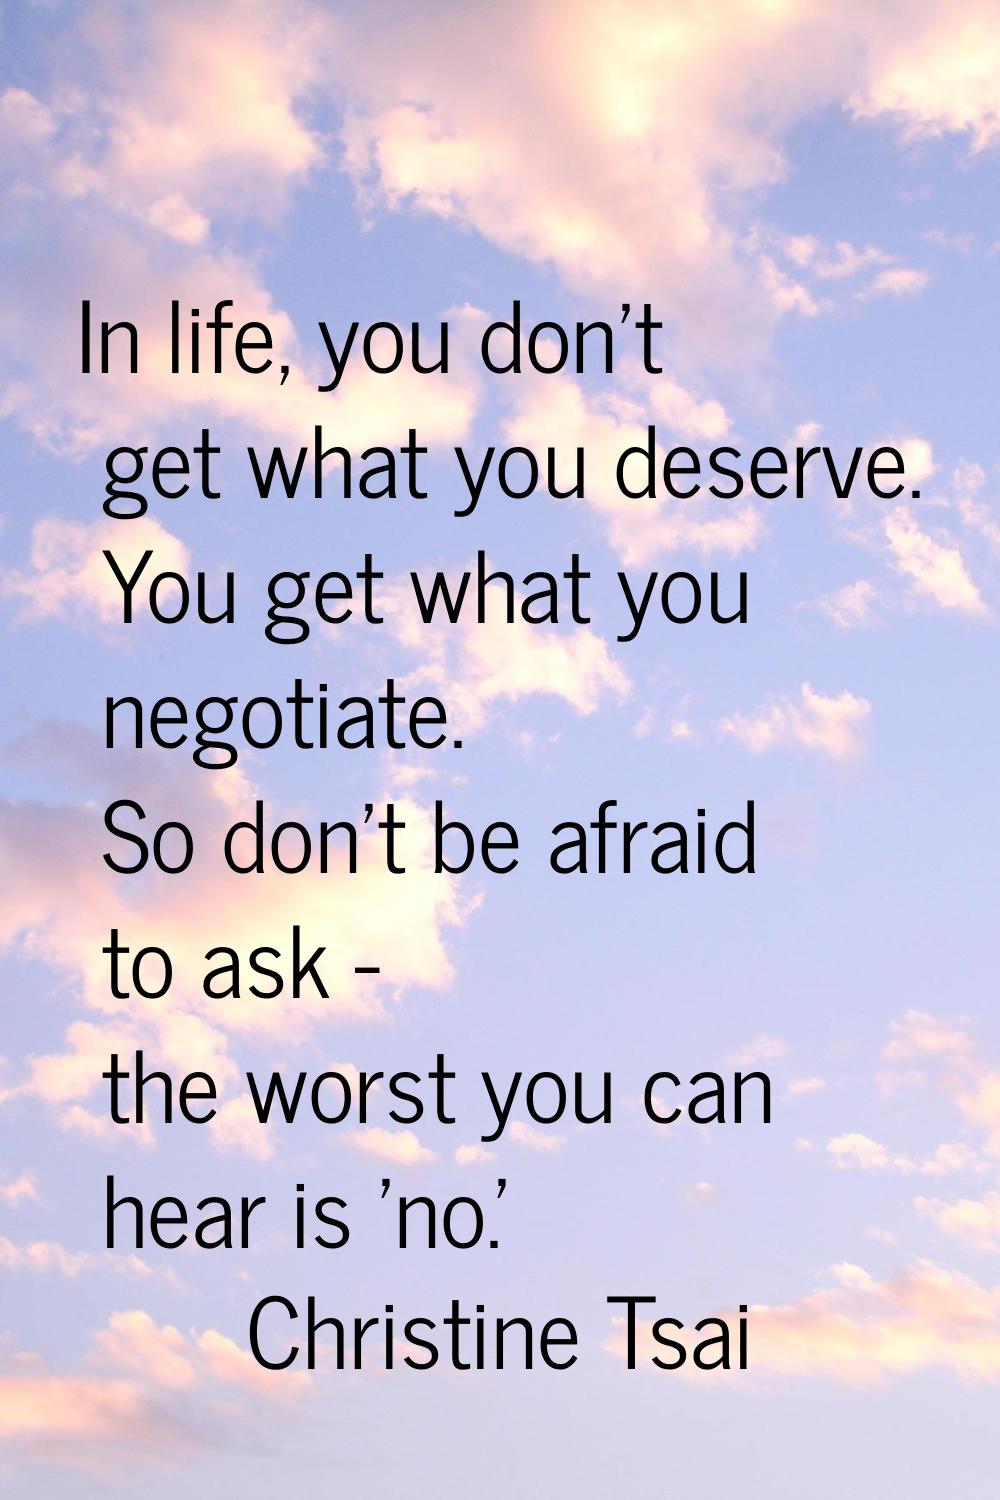 In life, you don't get what you deserve. You get what you negotiate. So don't be afraid to ask - th